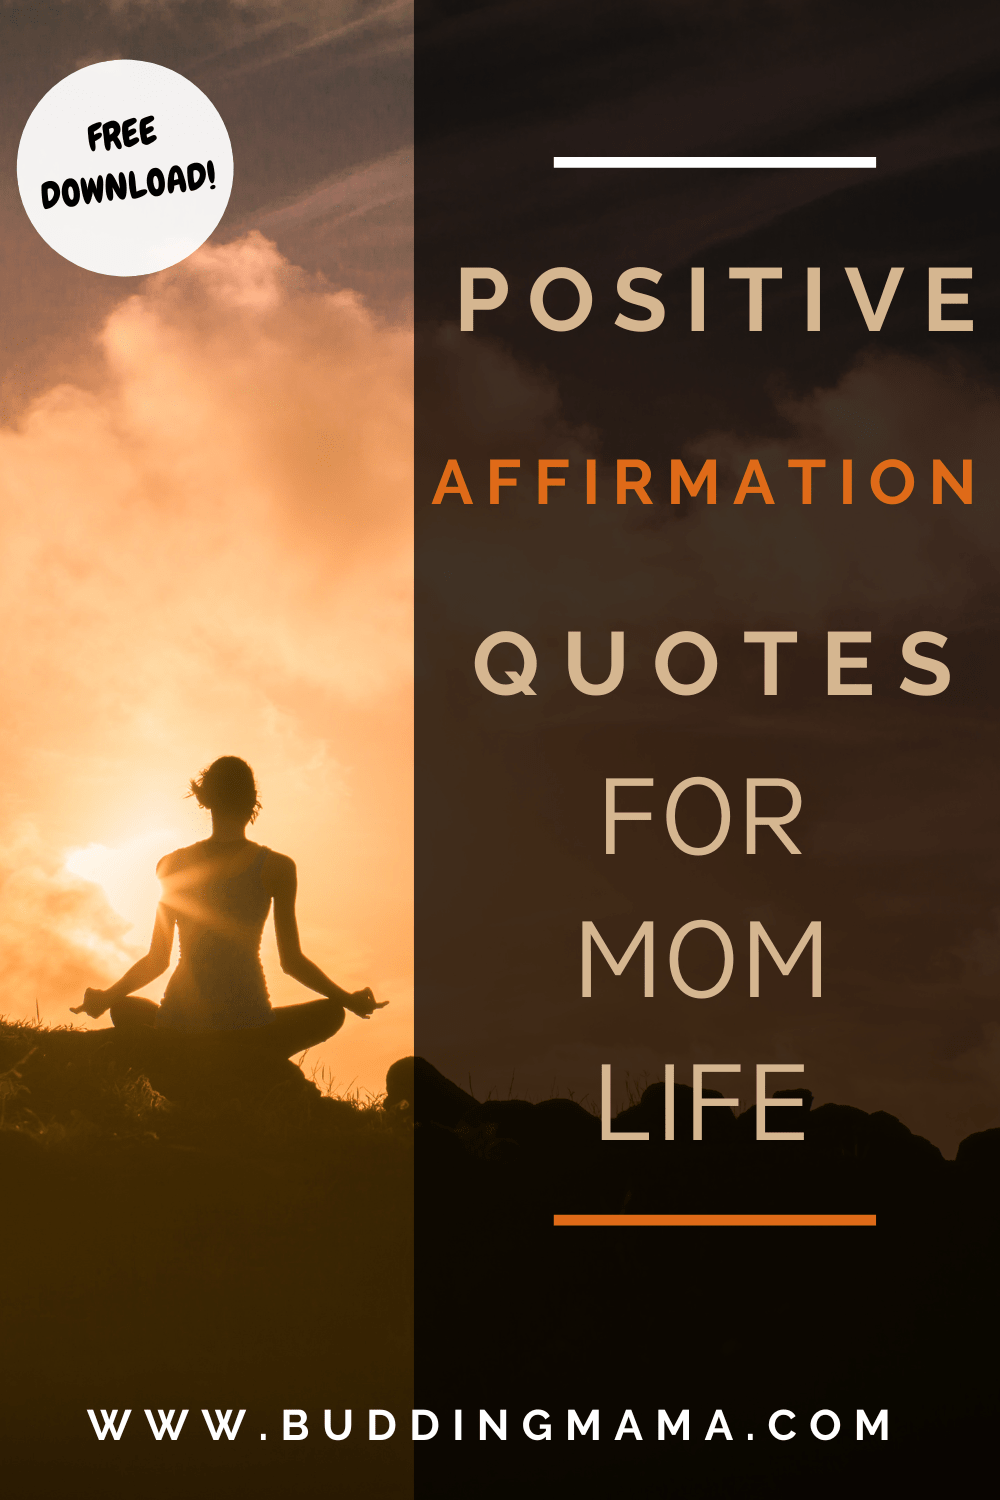 Positive Affirmation Quotes for Mom Life Free Download Budding Mama